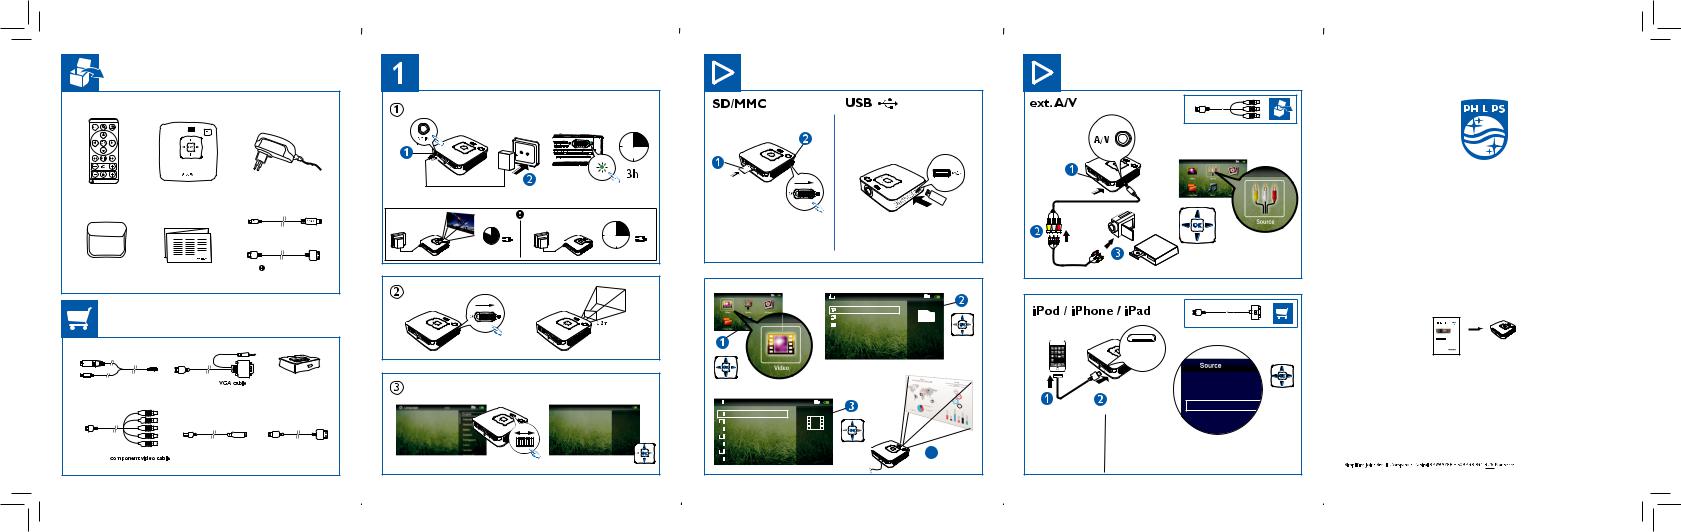 Philips PPX 3407, PPX 3410, PPX 3411, PPX 3414 Getting Started Guide